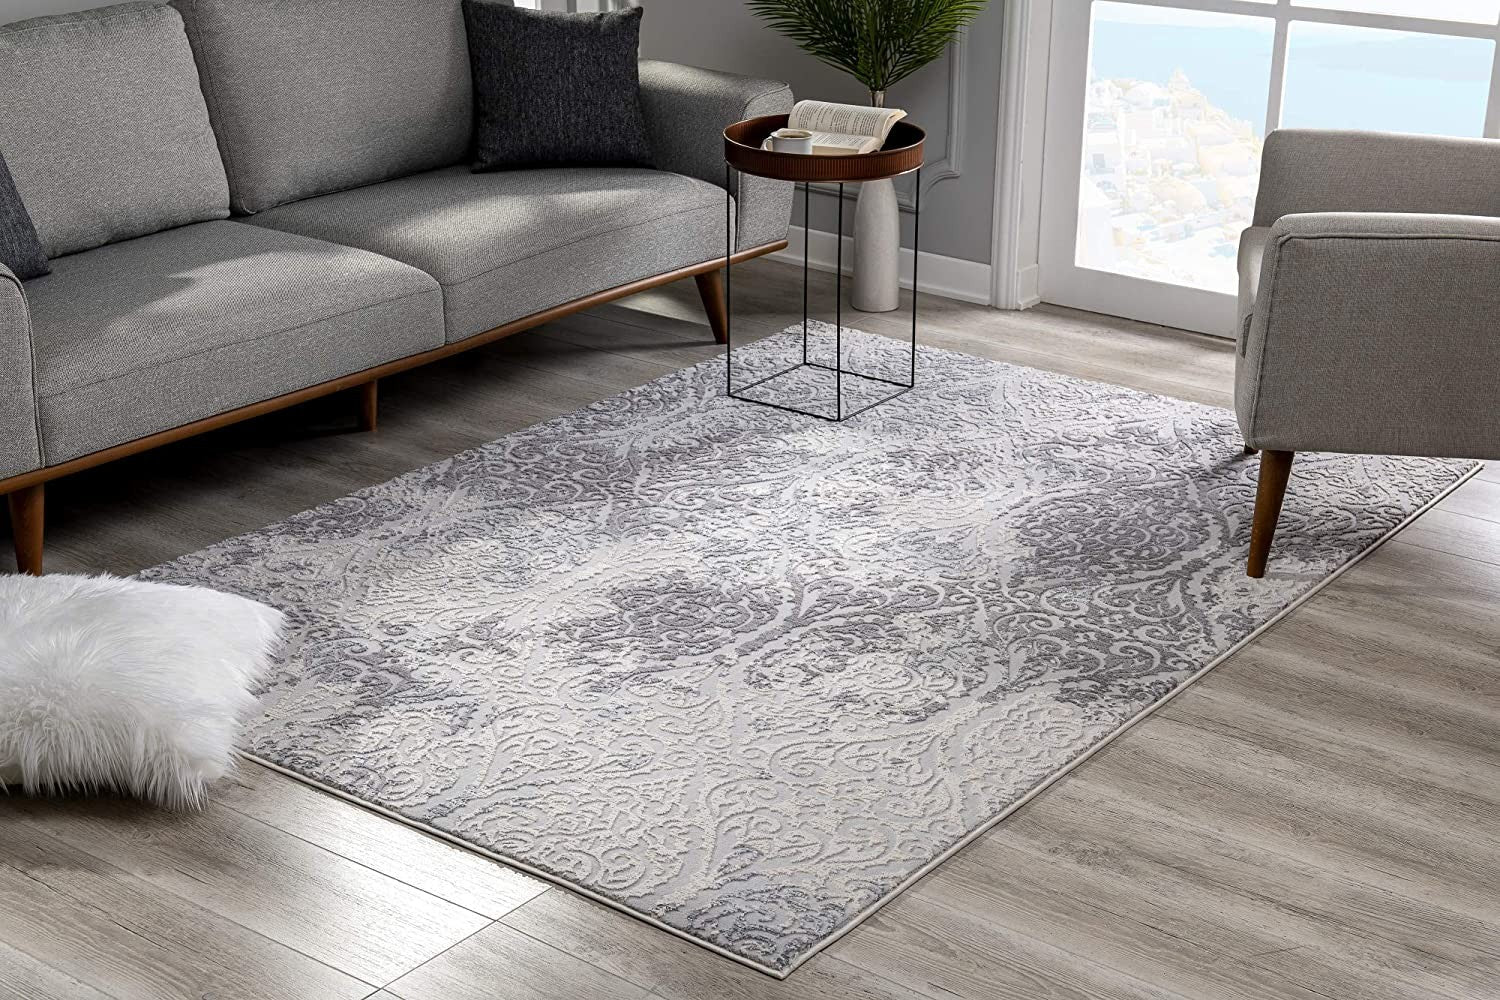 4’ X 6’ Cream And Gray Tinted Ogee Pattern Area Rug